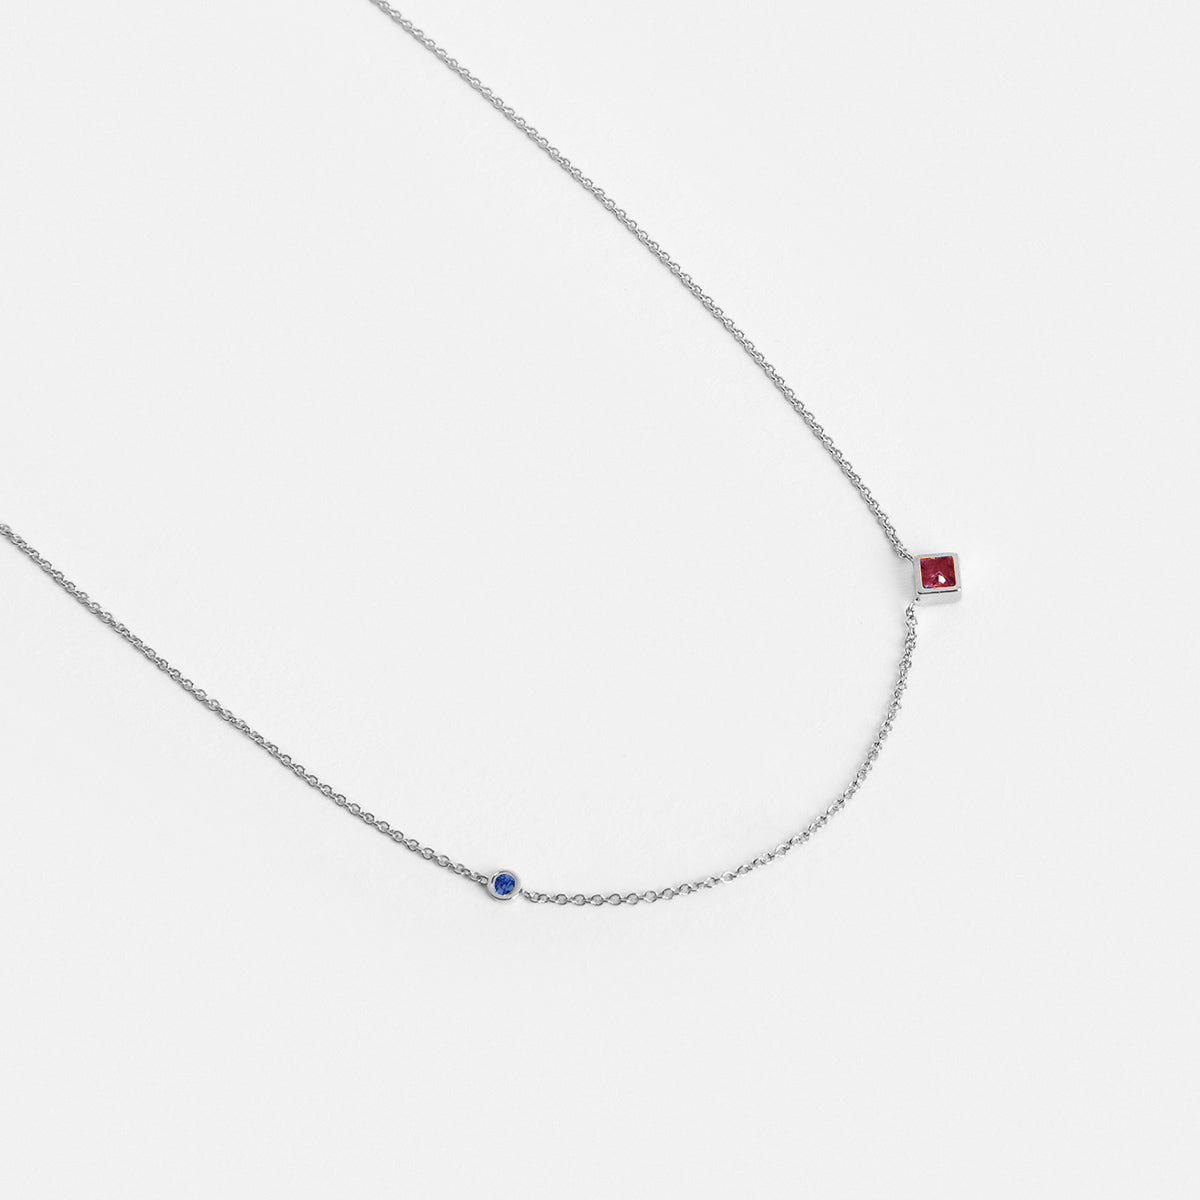 Isu Unique Necklace in 14k White Gold set with Sapphire and Ruby By SHW Fine Jewelry NYC